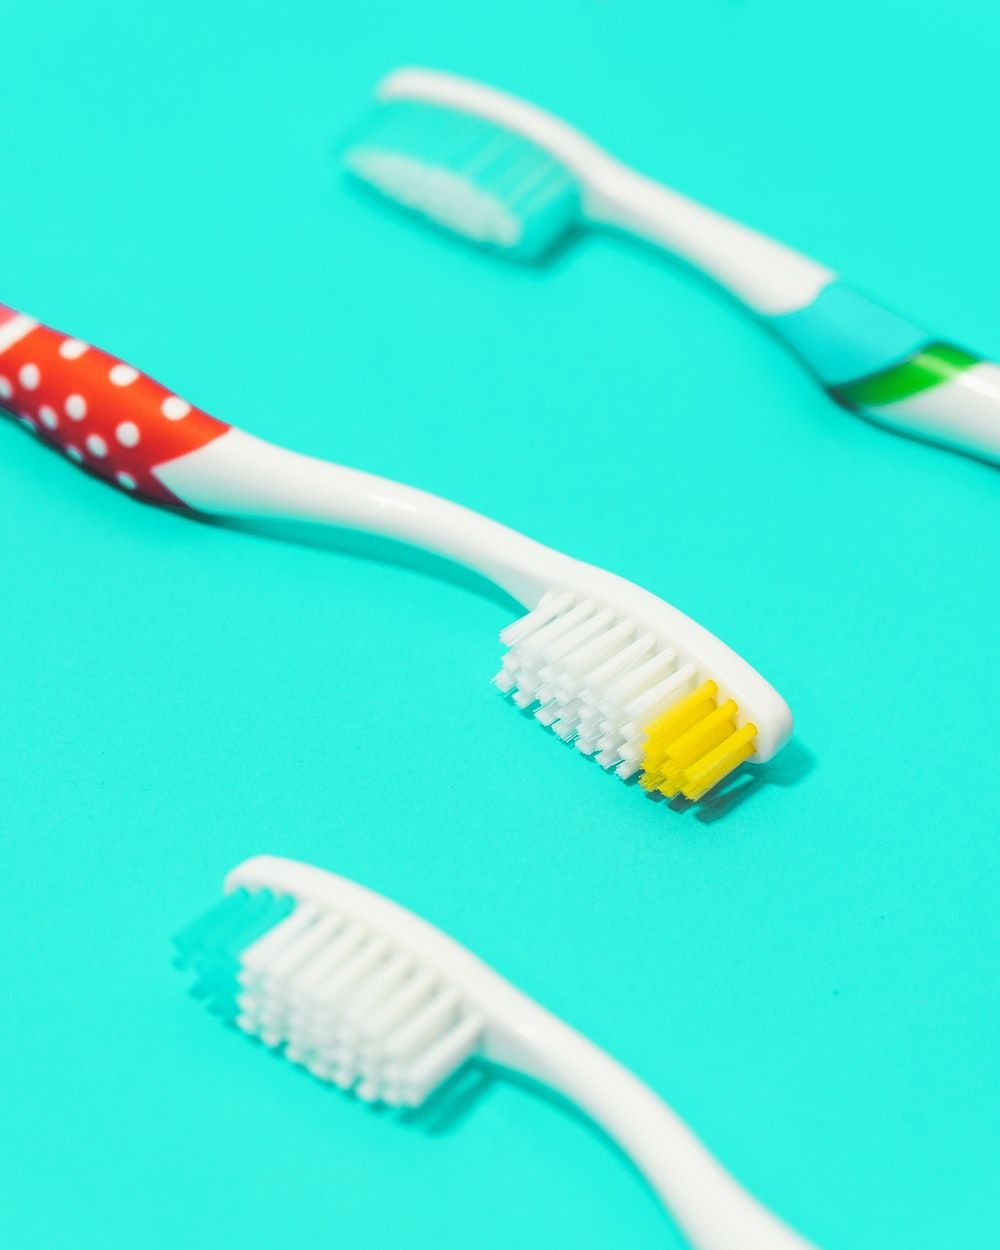 Teeth Brush Picture. Download Free Image